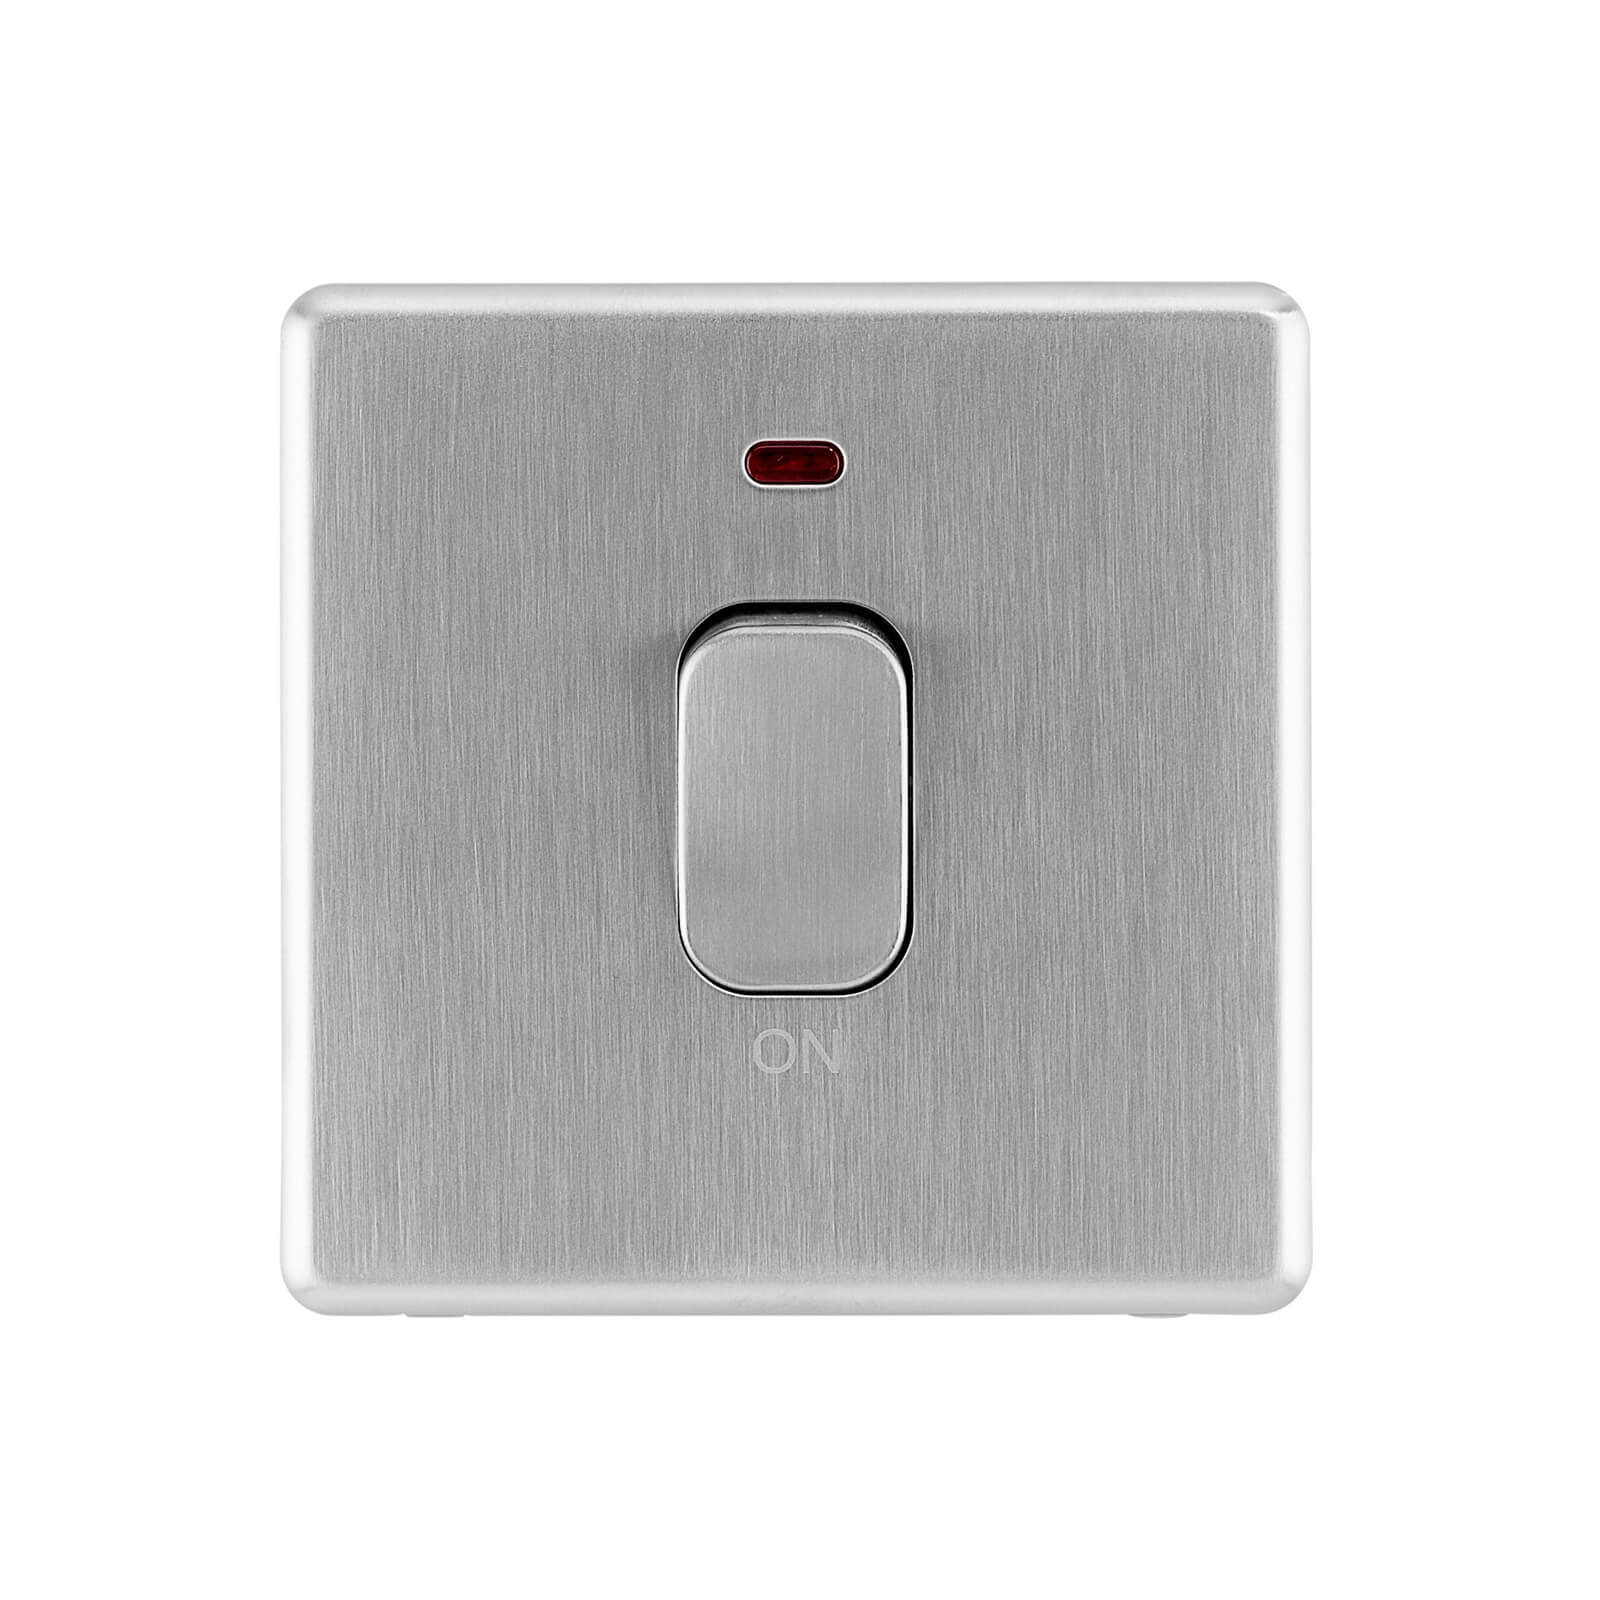 Arlec Fusion 50A 1 Gang Double pole Stainless Steel Single Switch